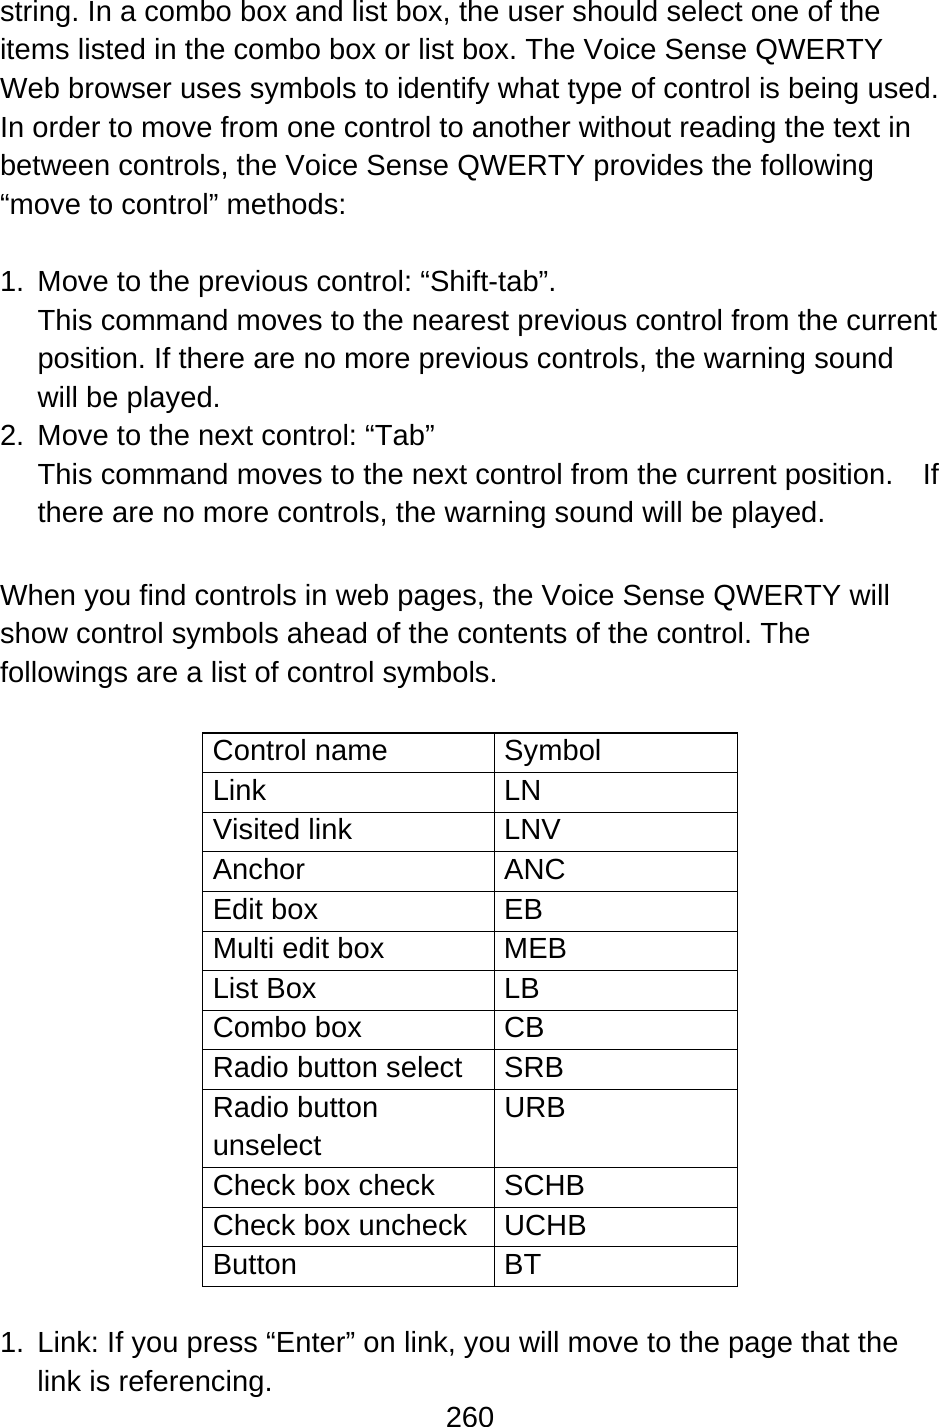 260  string. In a combo box and list box, the user should select one of the items listed in the combo box or list box. The Voice Sense QWERTY Web browser uses symbols to identify what type of control is being used. In order to move from one control to another without reading the text in between controls, the Voice Sense QWERTY provides the following “move to control” methods:  1.  Move to the previous control: “Shift-tab”.   This command moves to the nearest previous control from the current position. If there are no more previous controls, the warning sound will be played. 2.  Move to the next control: “Tab” This command moves to the next control from the current position.  If there are no more controls, the warning sound will be played.  When you find controls in web pages, the Voice Sense QWERTY will show control symbols ahead of the contents of the control. The followings are a list of control symbols.  Control name  Symbol Link LN Visited link  LNV Anchor ANC Edit box  EB Multi edit box  MEB List Box  LB Combo box  CB Radio button select  SRB Radio button unselect URB Check box check  SCHB Check box uncheck  UCHB Button BT  1.  Link: If you press “Enter” on link, you will move to the page that the link is referencing. 